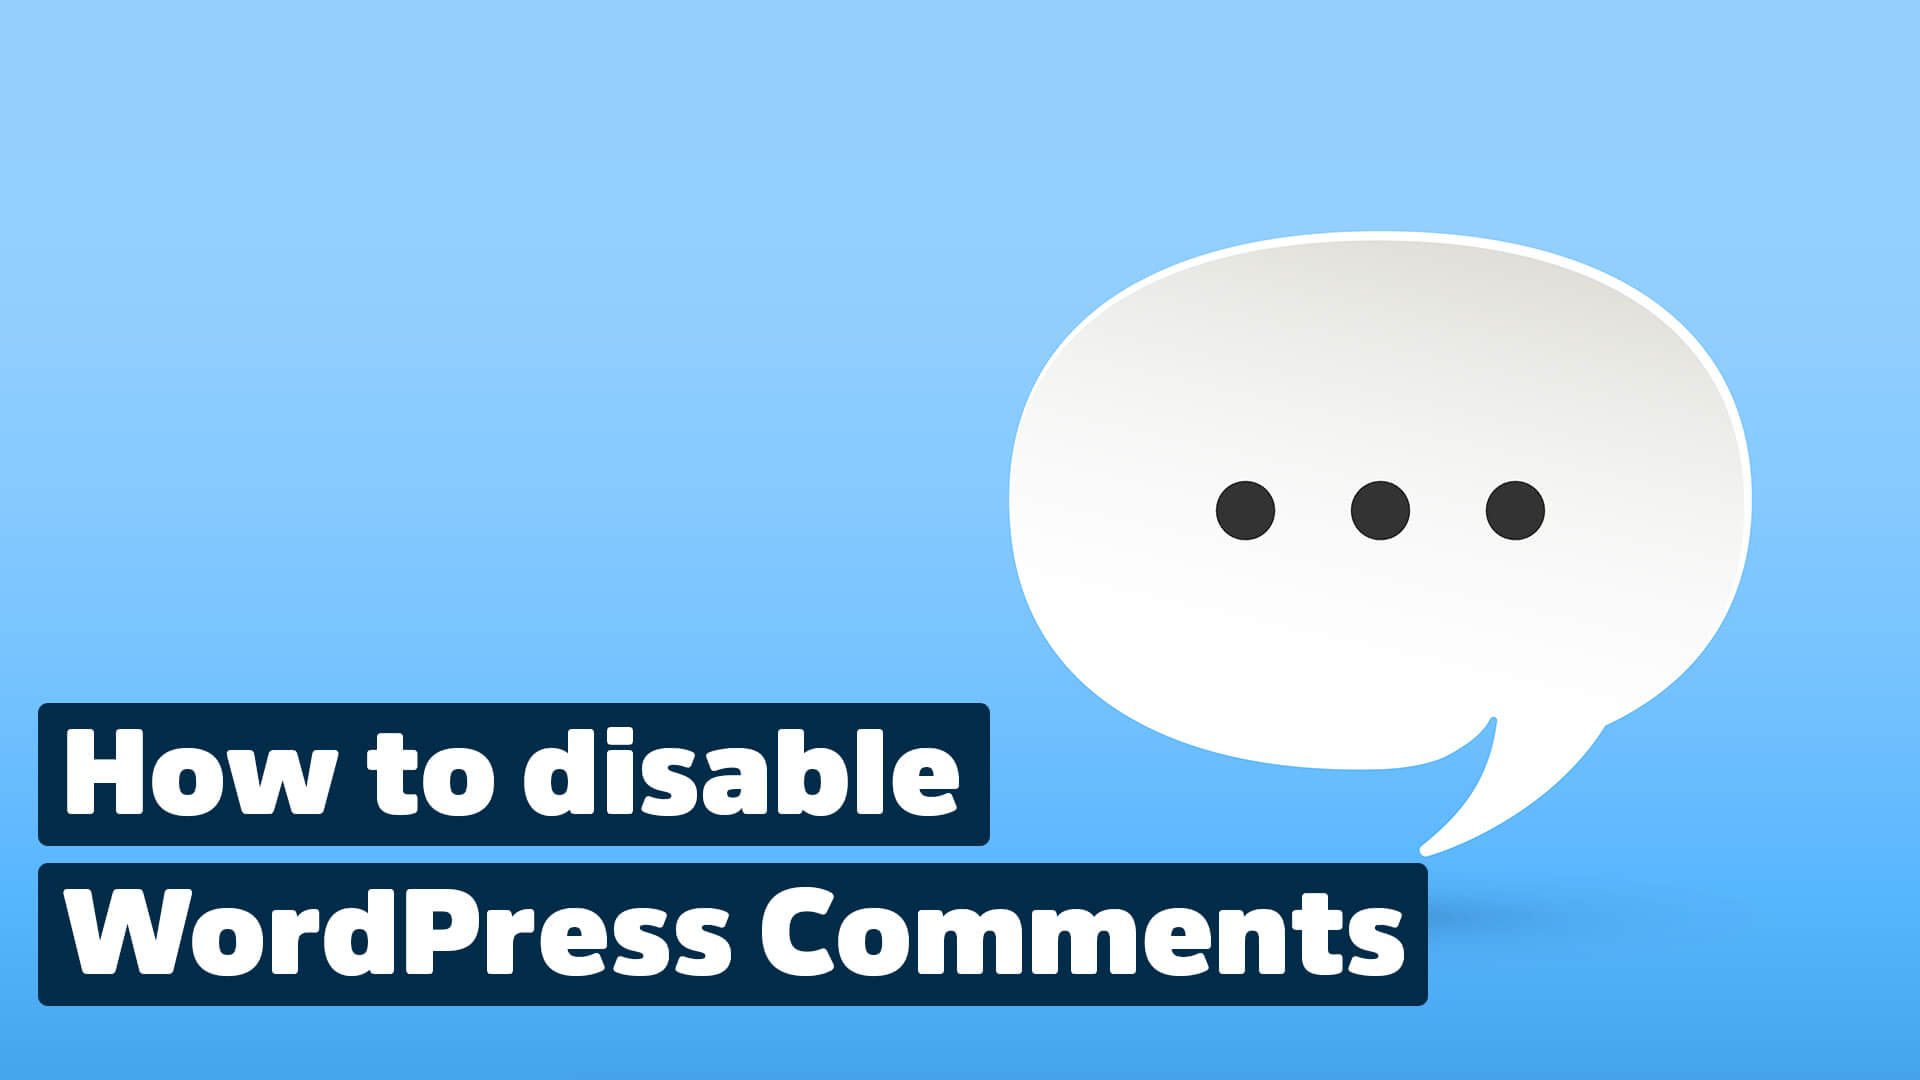 Disable comments in WordPress